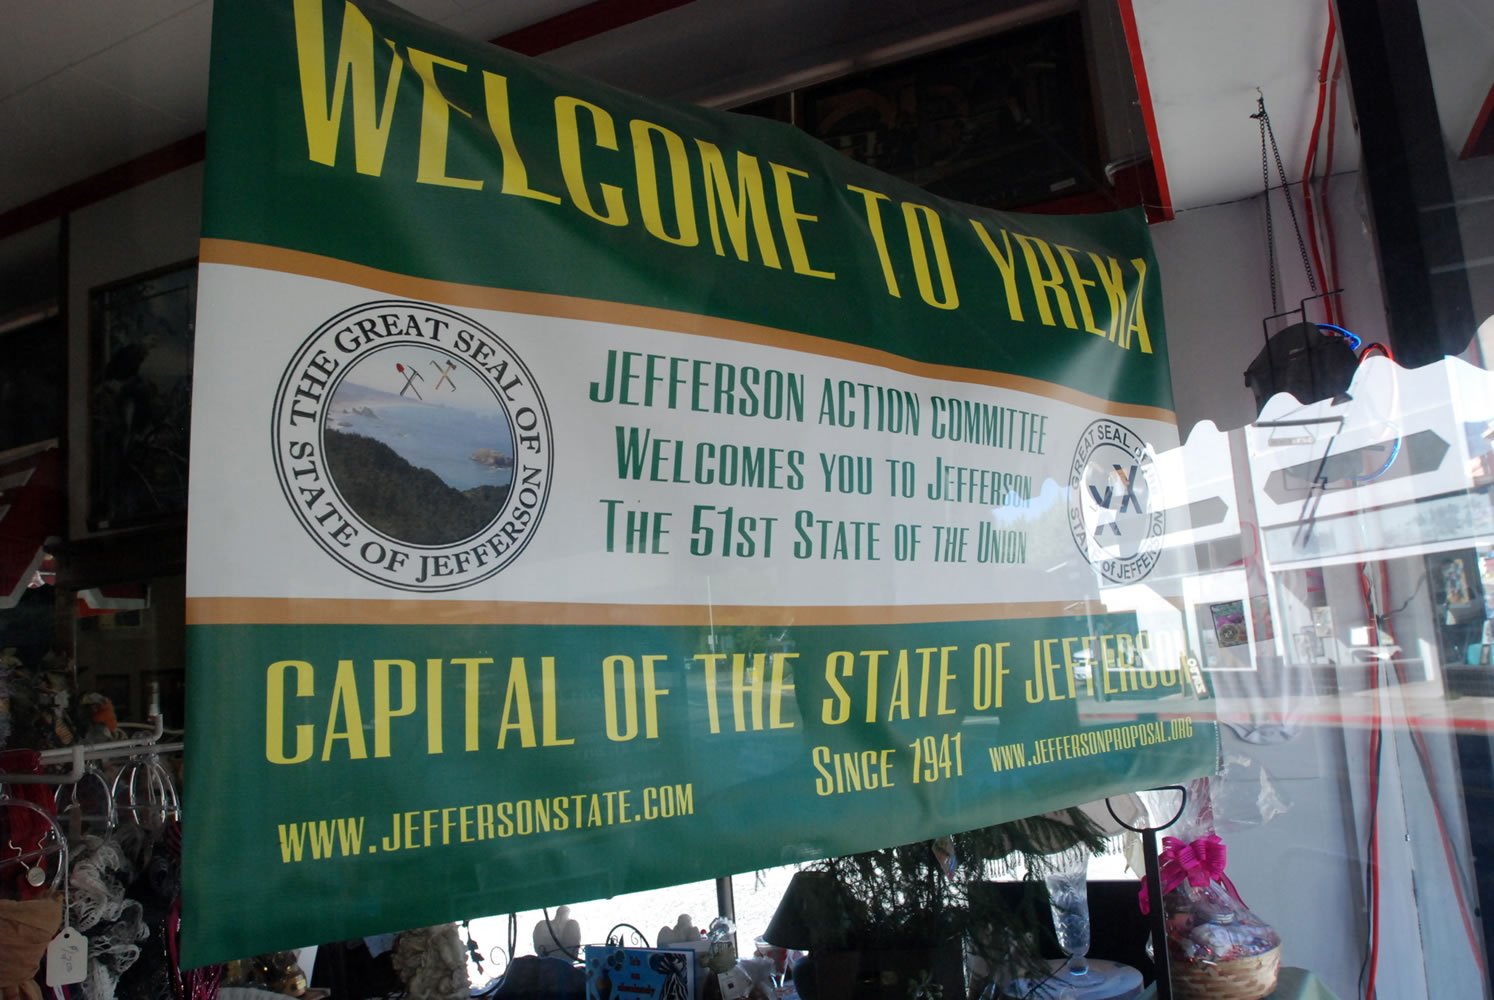 A banner in the window of a downtown Yreka, Calif., business welcomes visitors to the State of Jefferson.